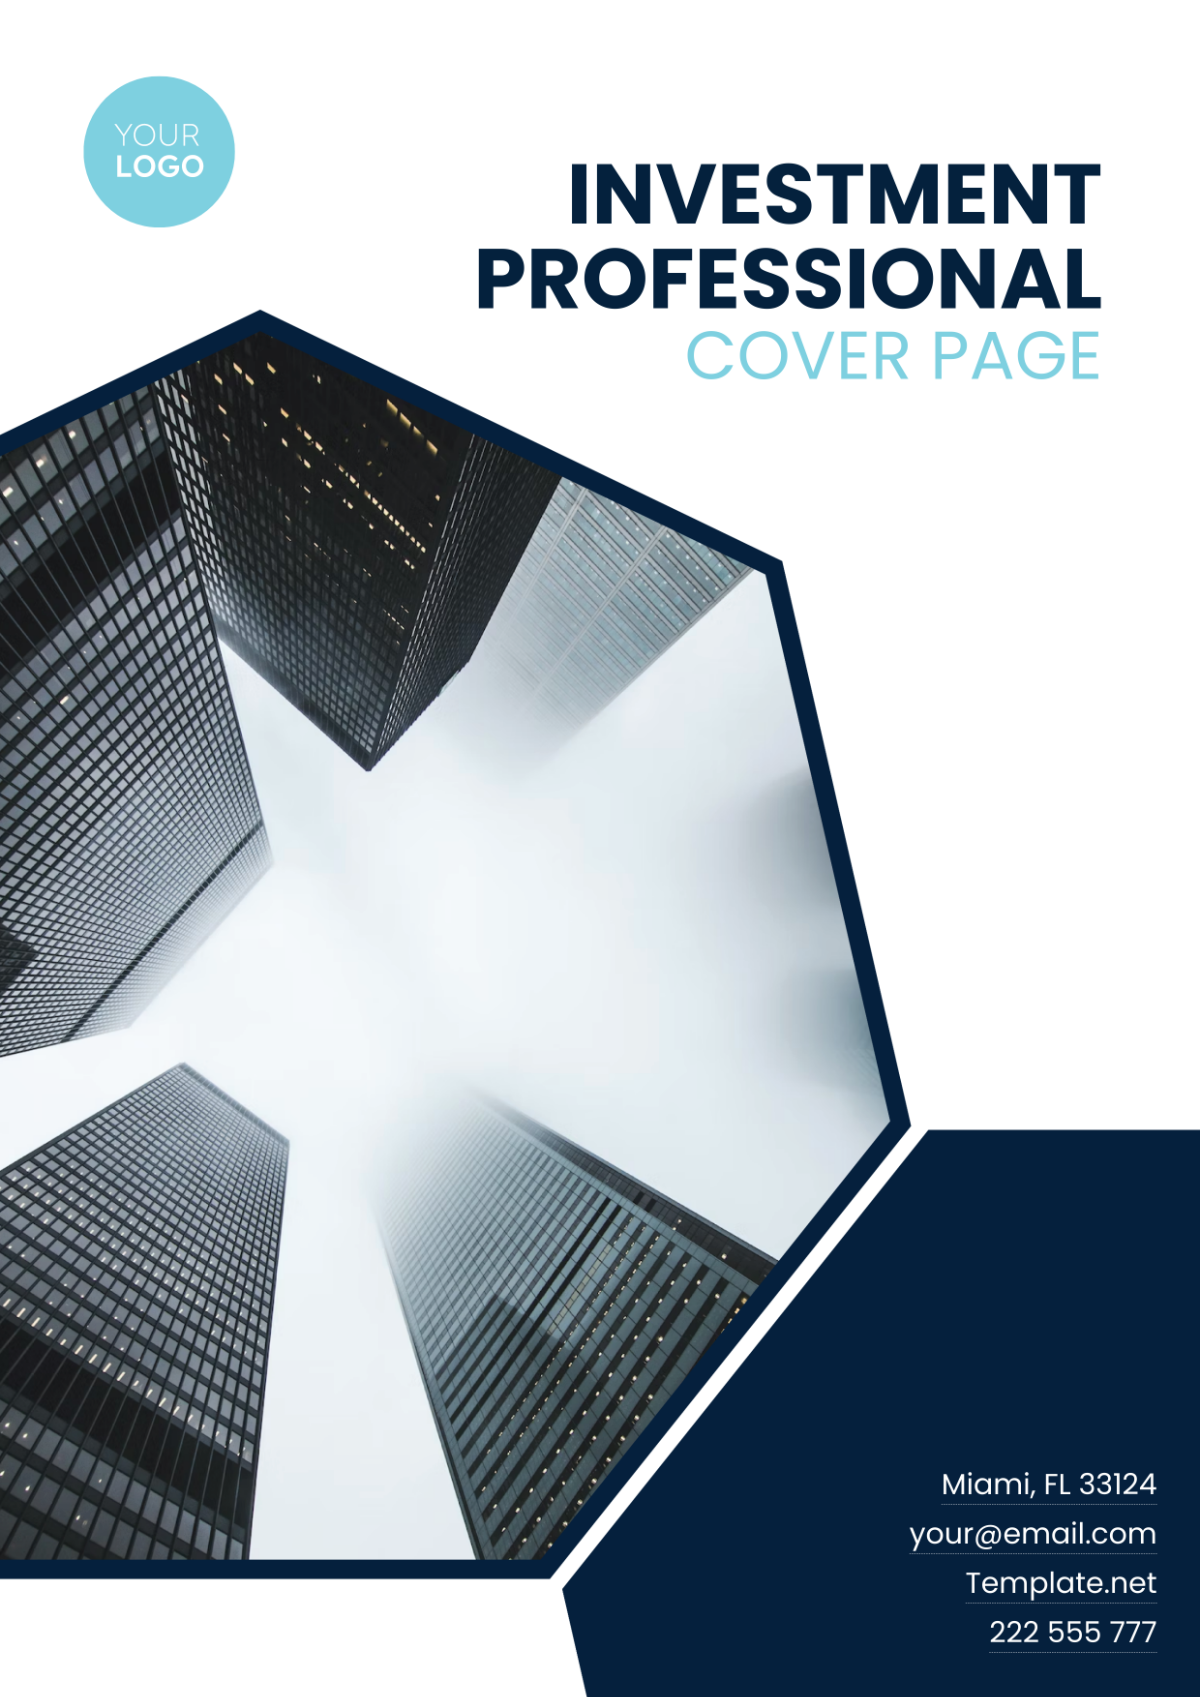 Investment Professional Cover Page Template